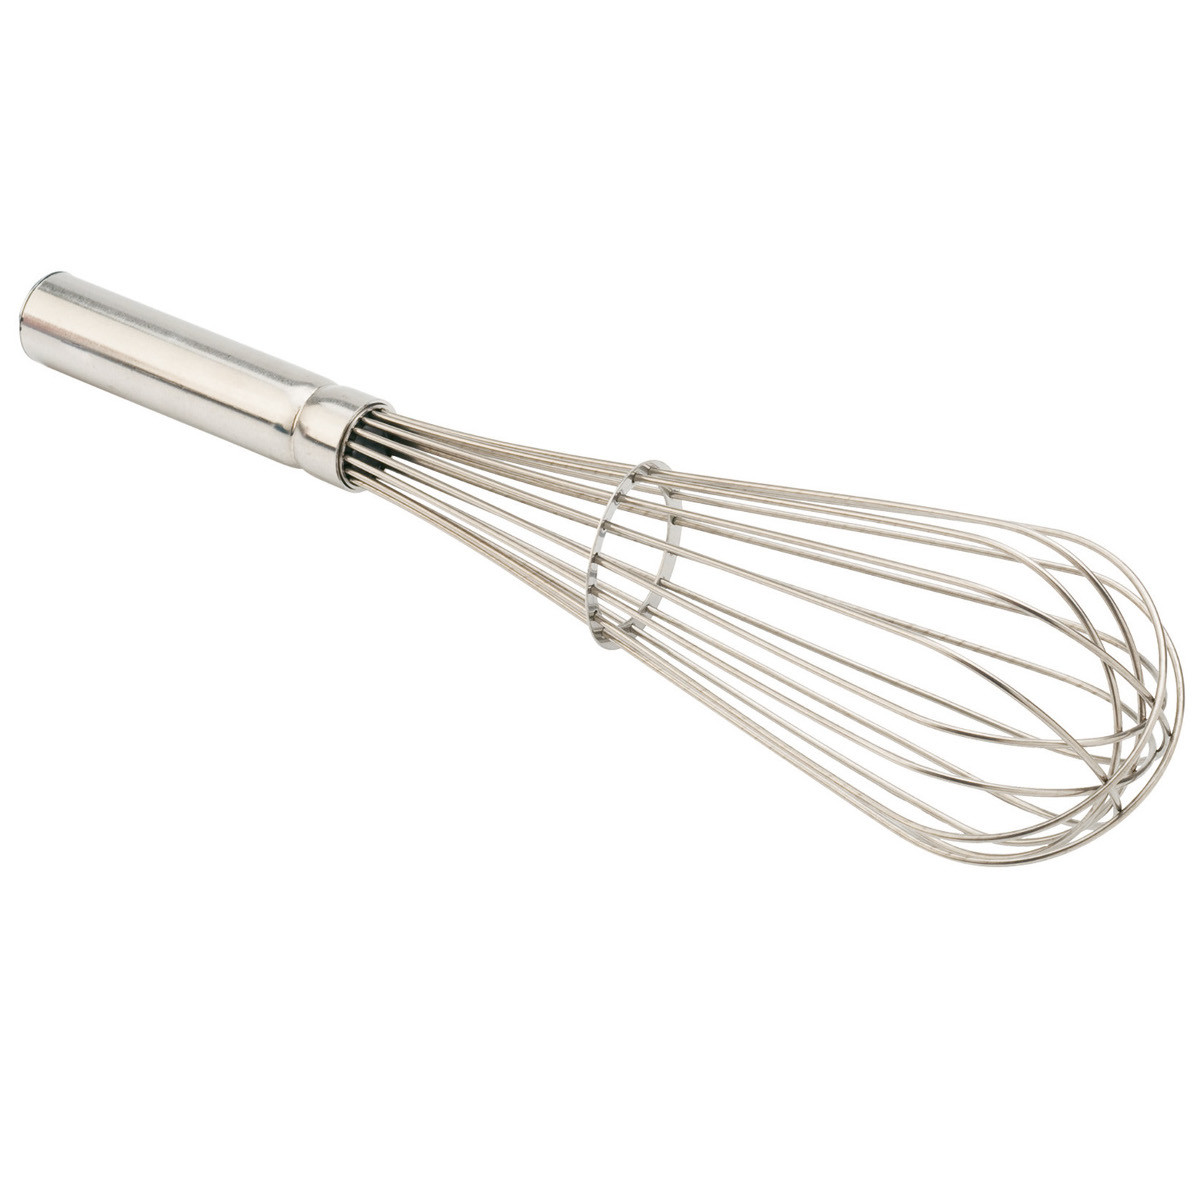 Pro Whisk Stainless Steel